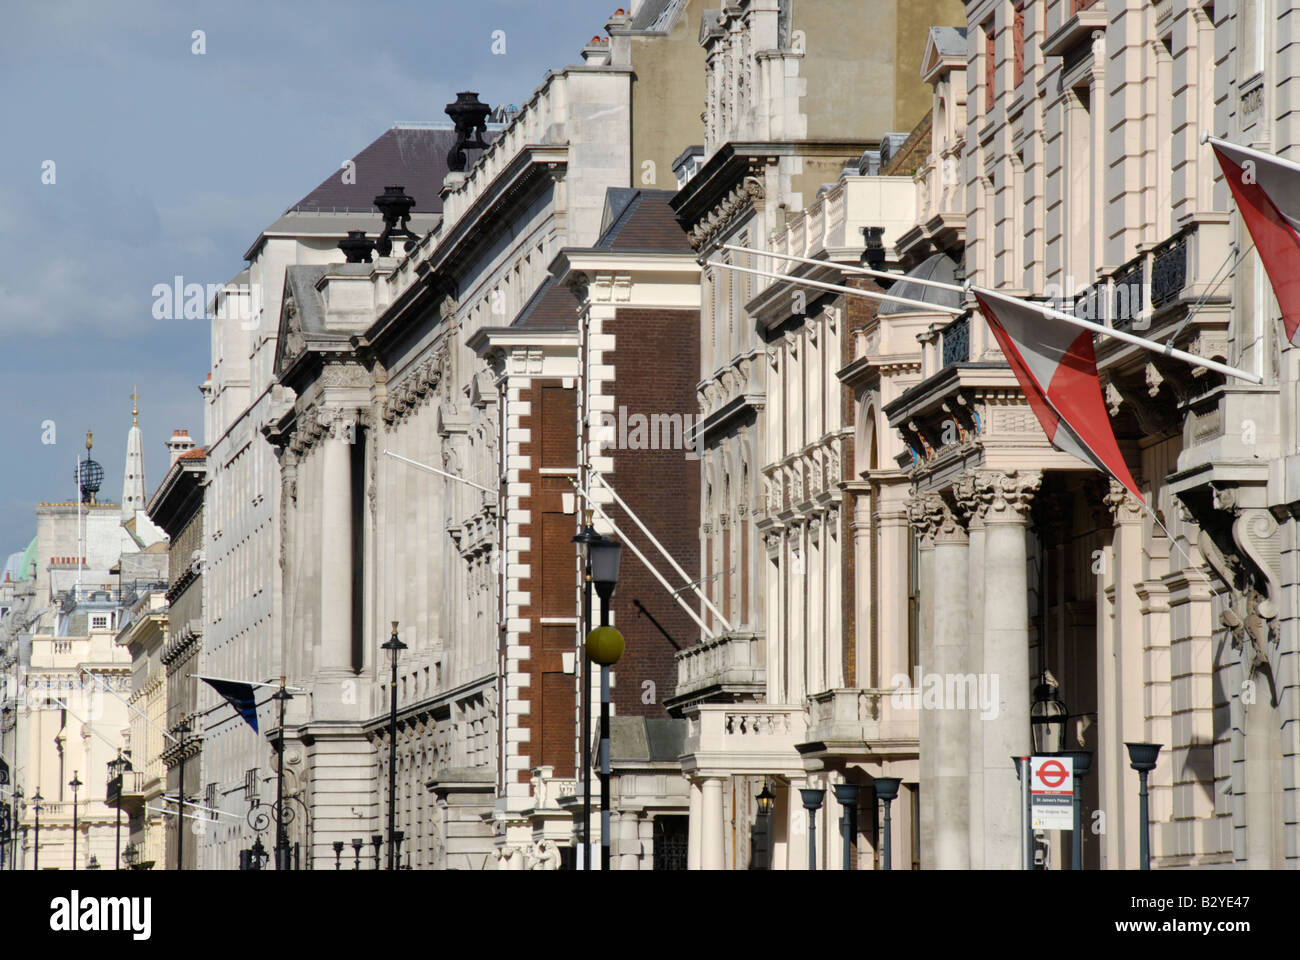 Historical building facades of Pall Mall gentlemen's clubs London England Stock Photo